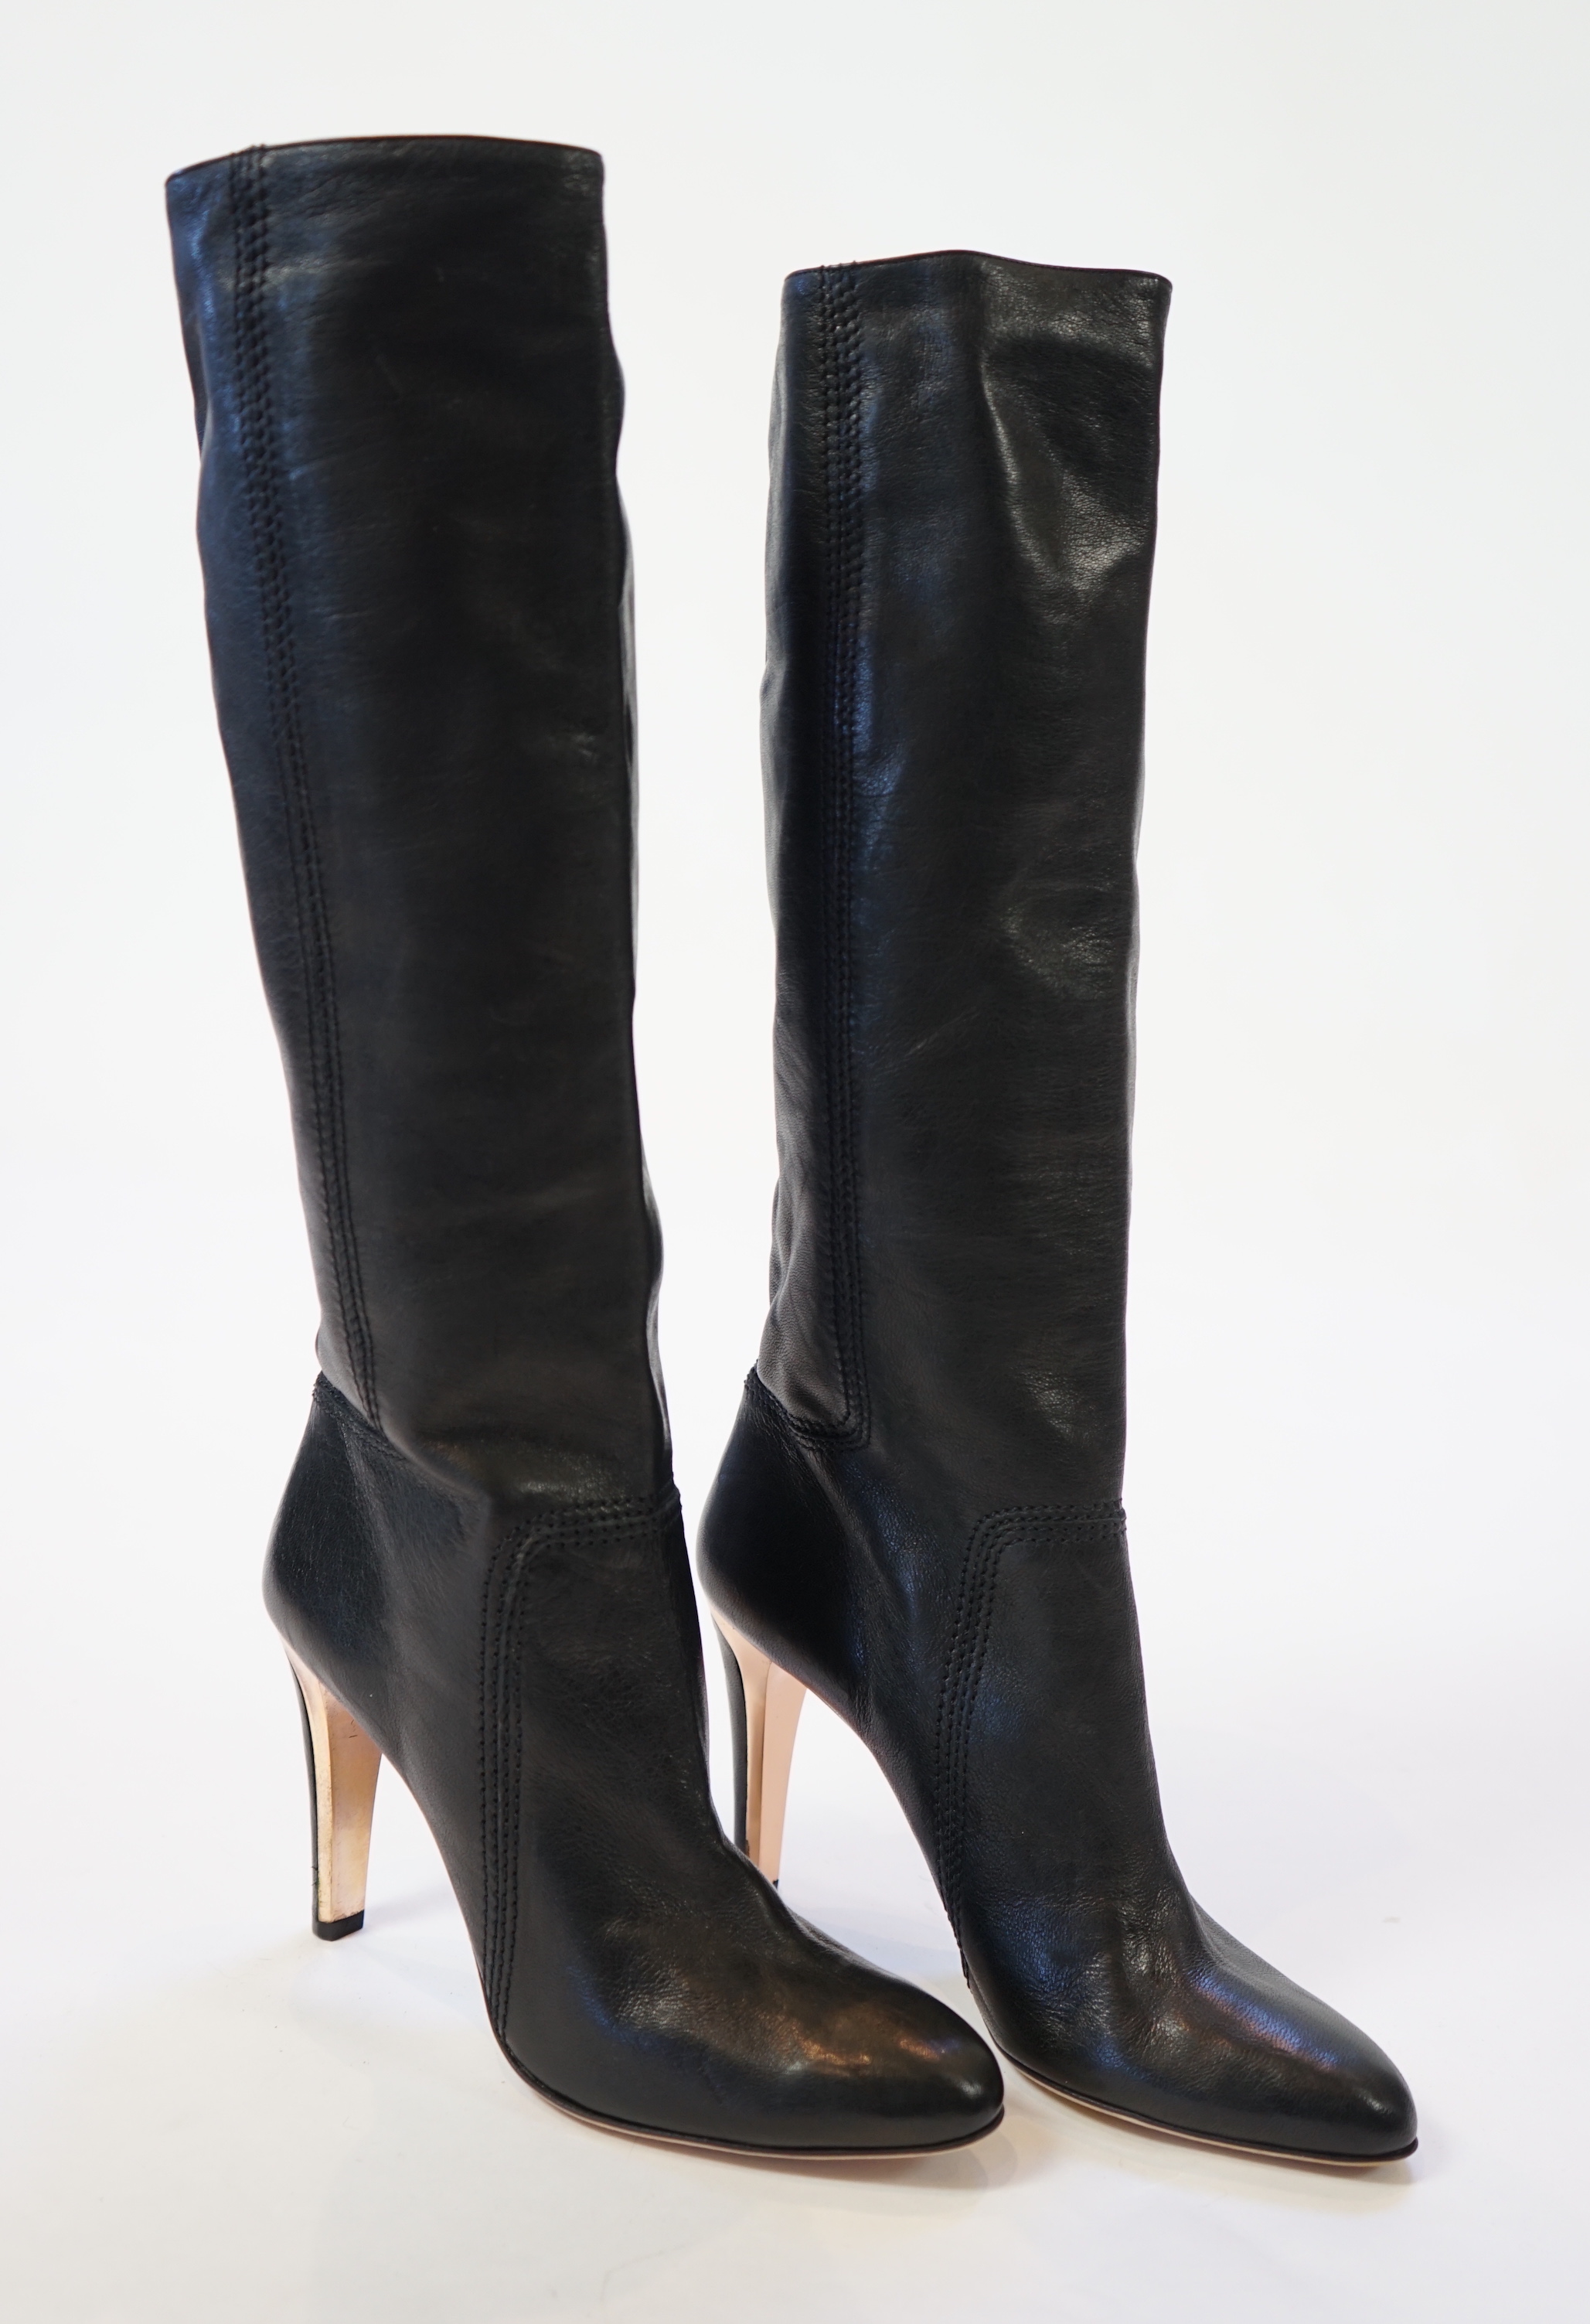 Two pairs of Jimmy Choo black leather heeled lady's boots, size EU 39